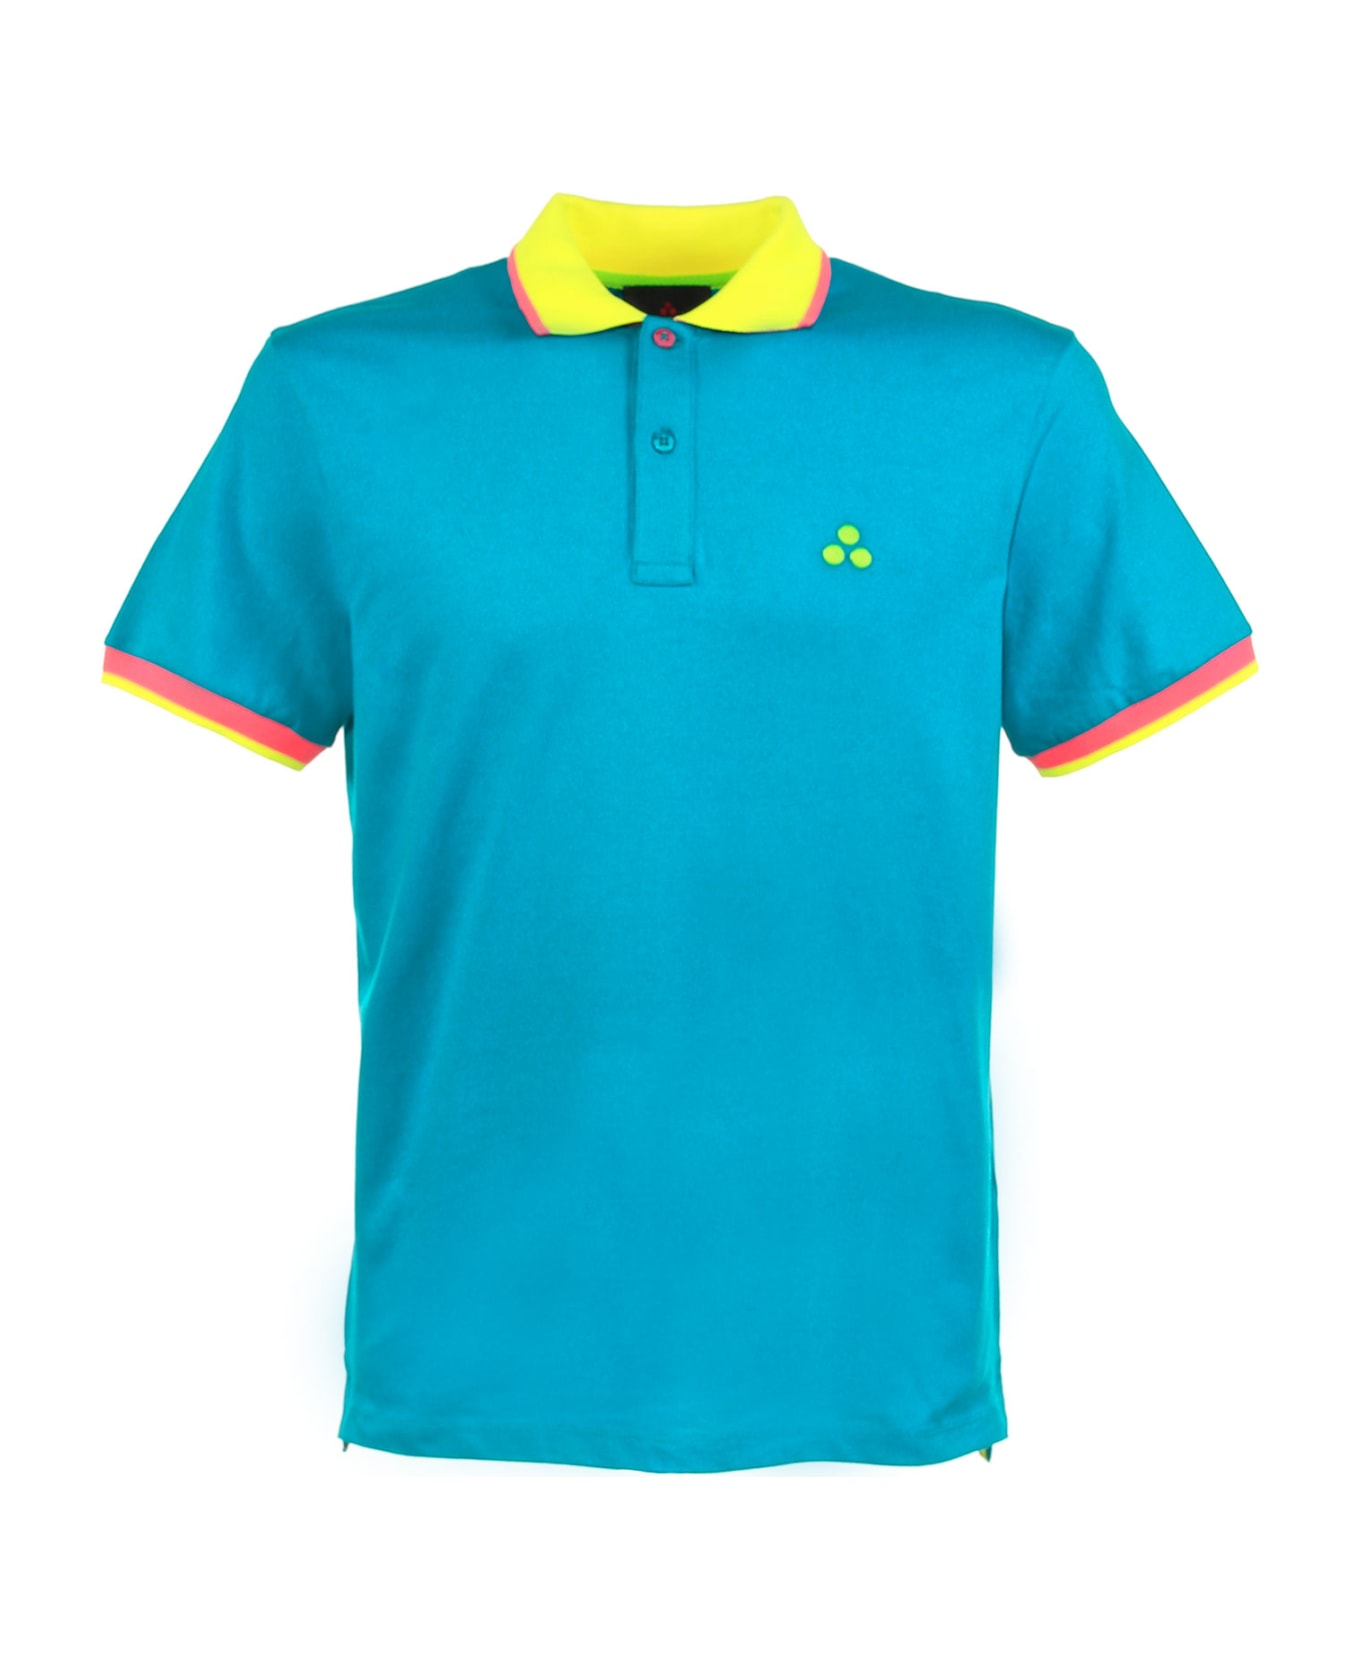 Peuterey Polo Shirt With Contrasting Details - OTTANIO